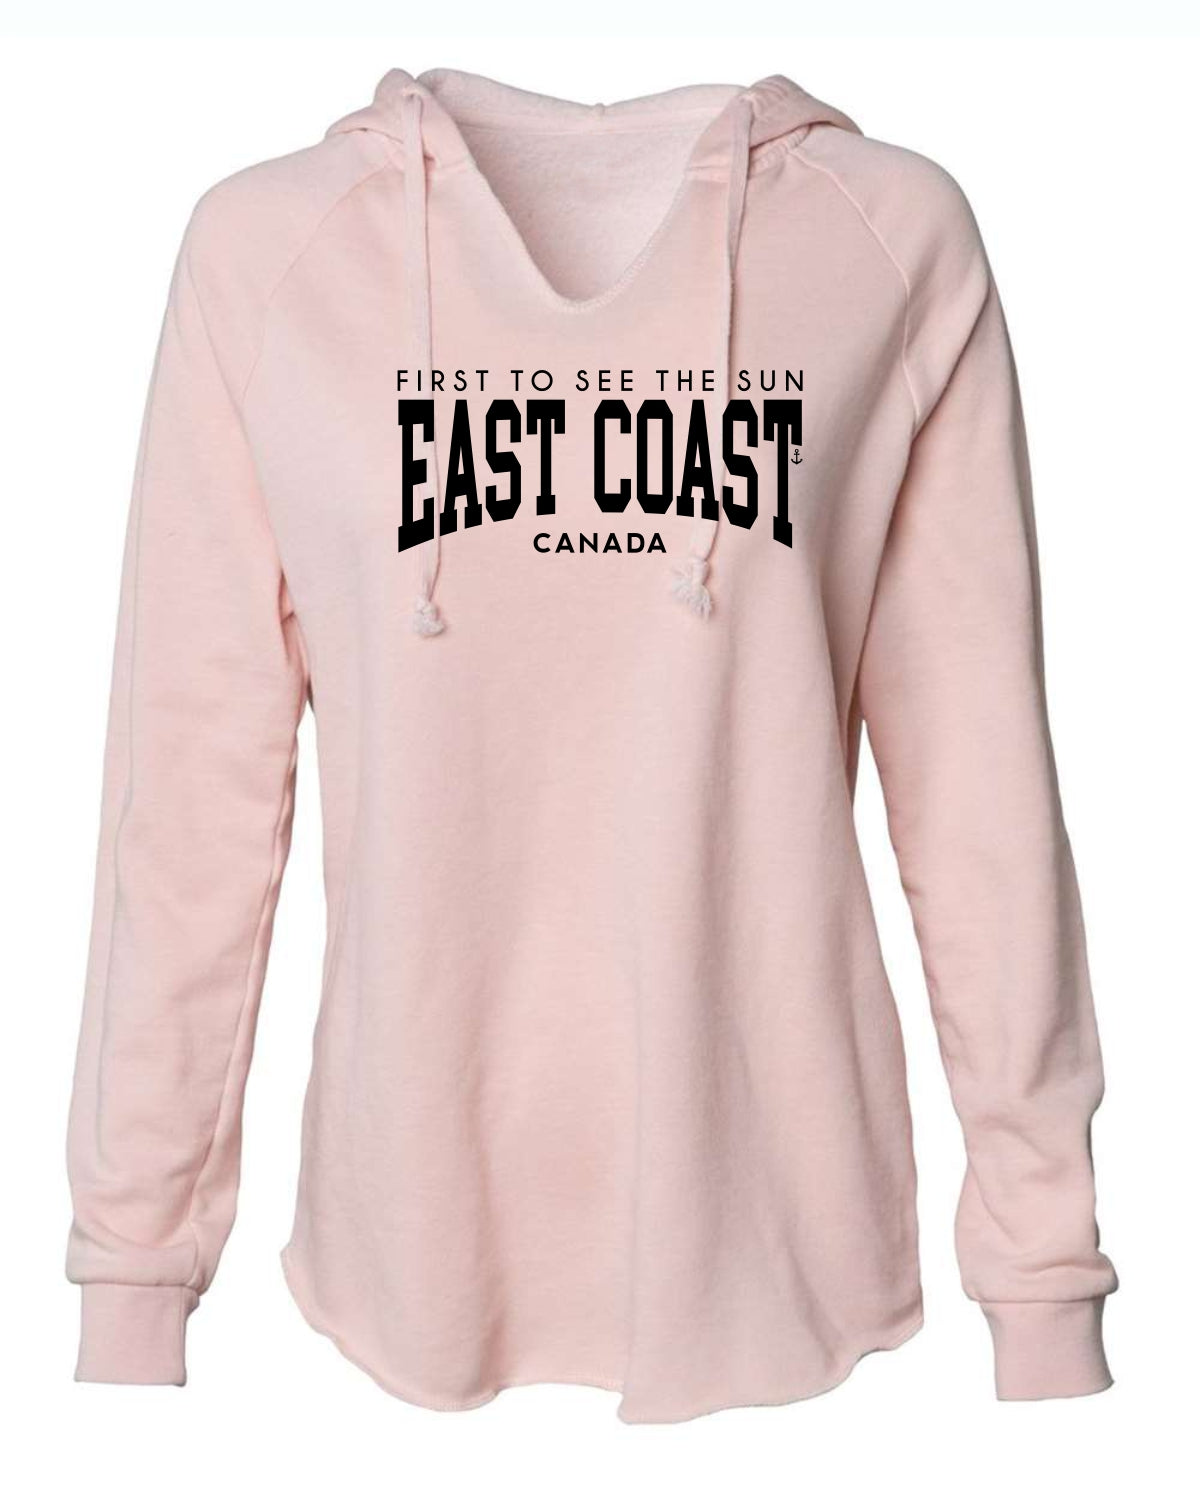 "East Coast - First To See The Sun" Ladies' Hoodie